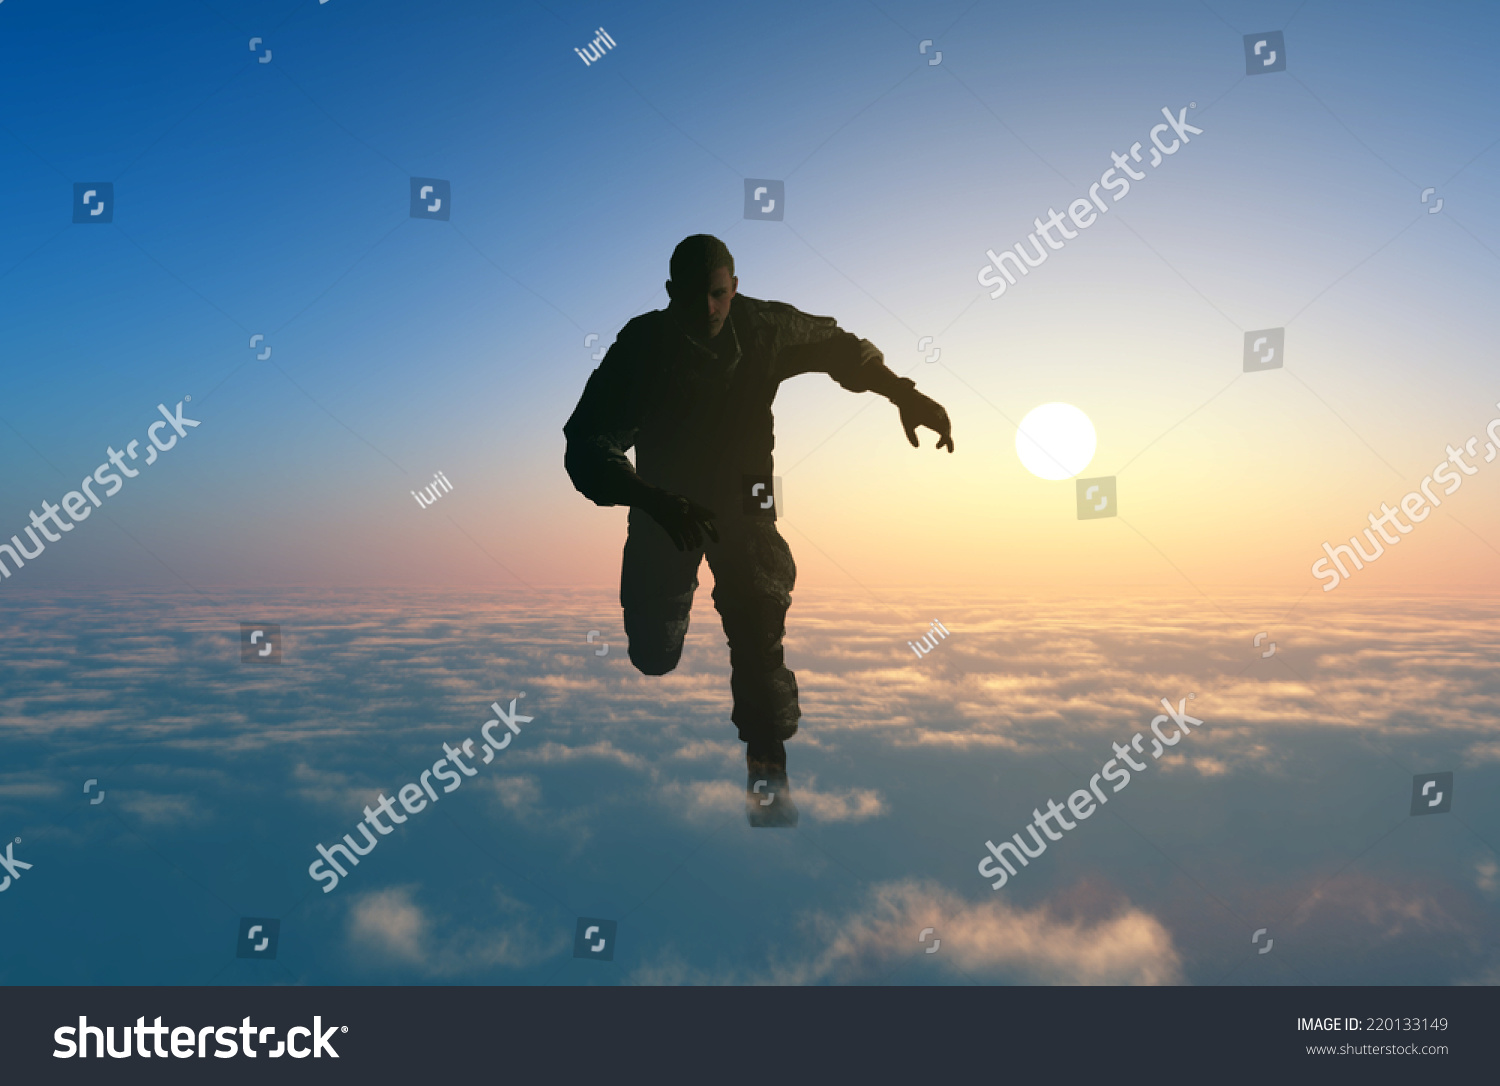 running on clouds